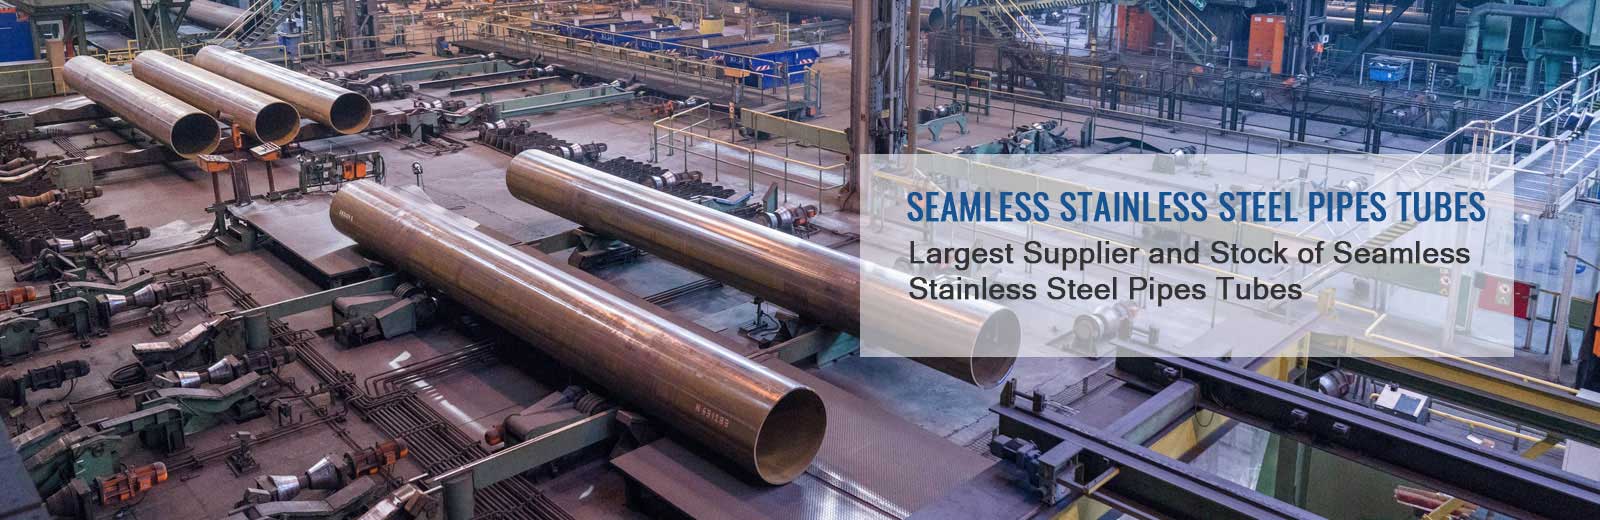 Seamless Stainless Steel Pipes Tubes